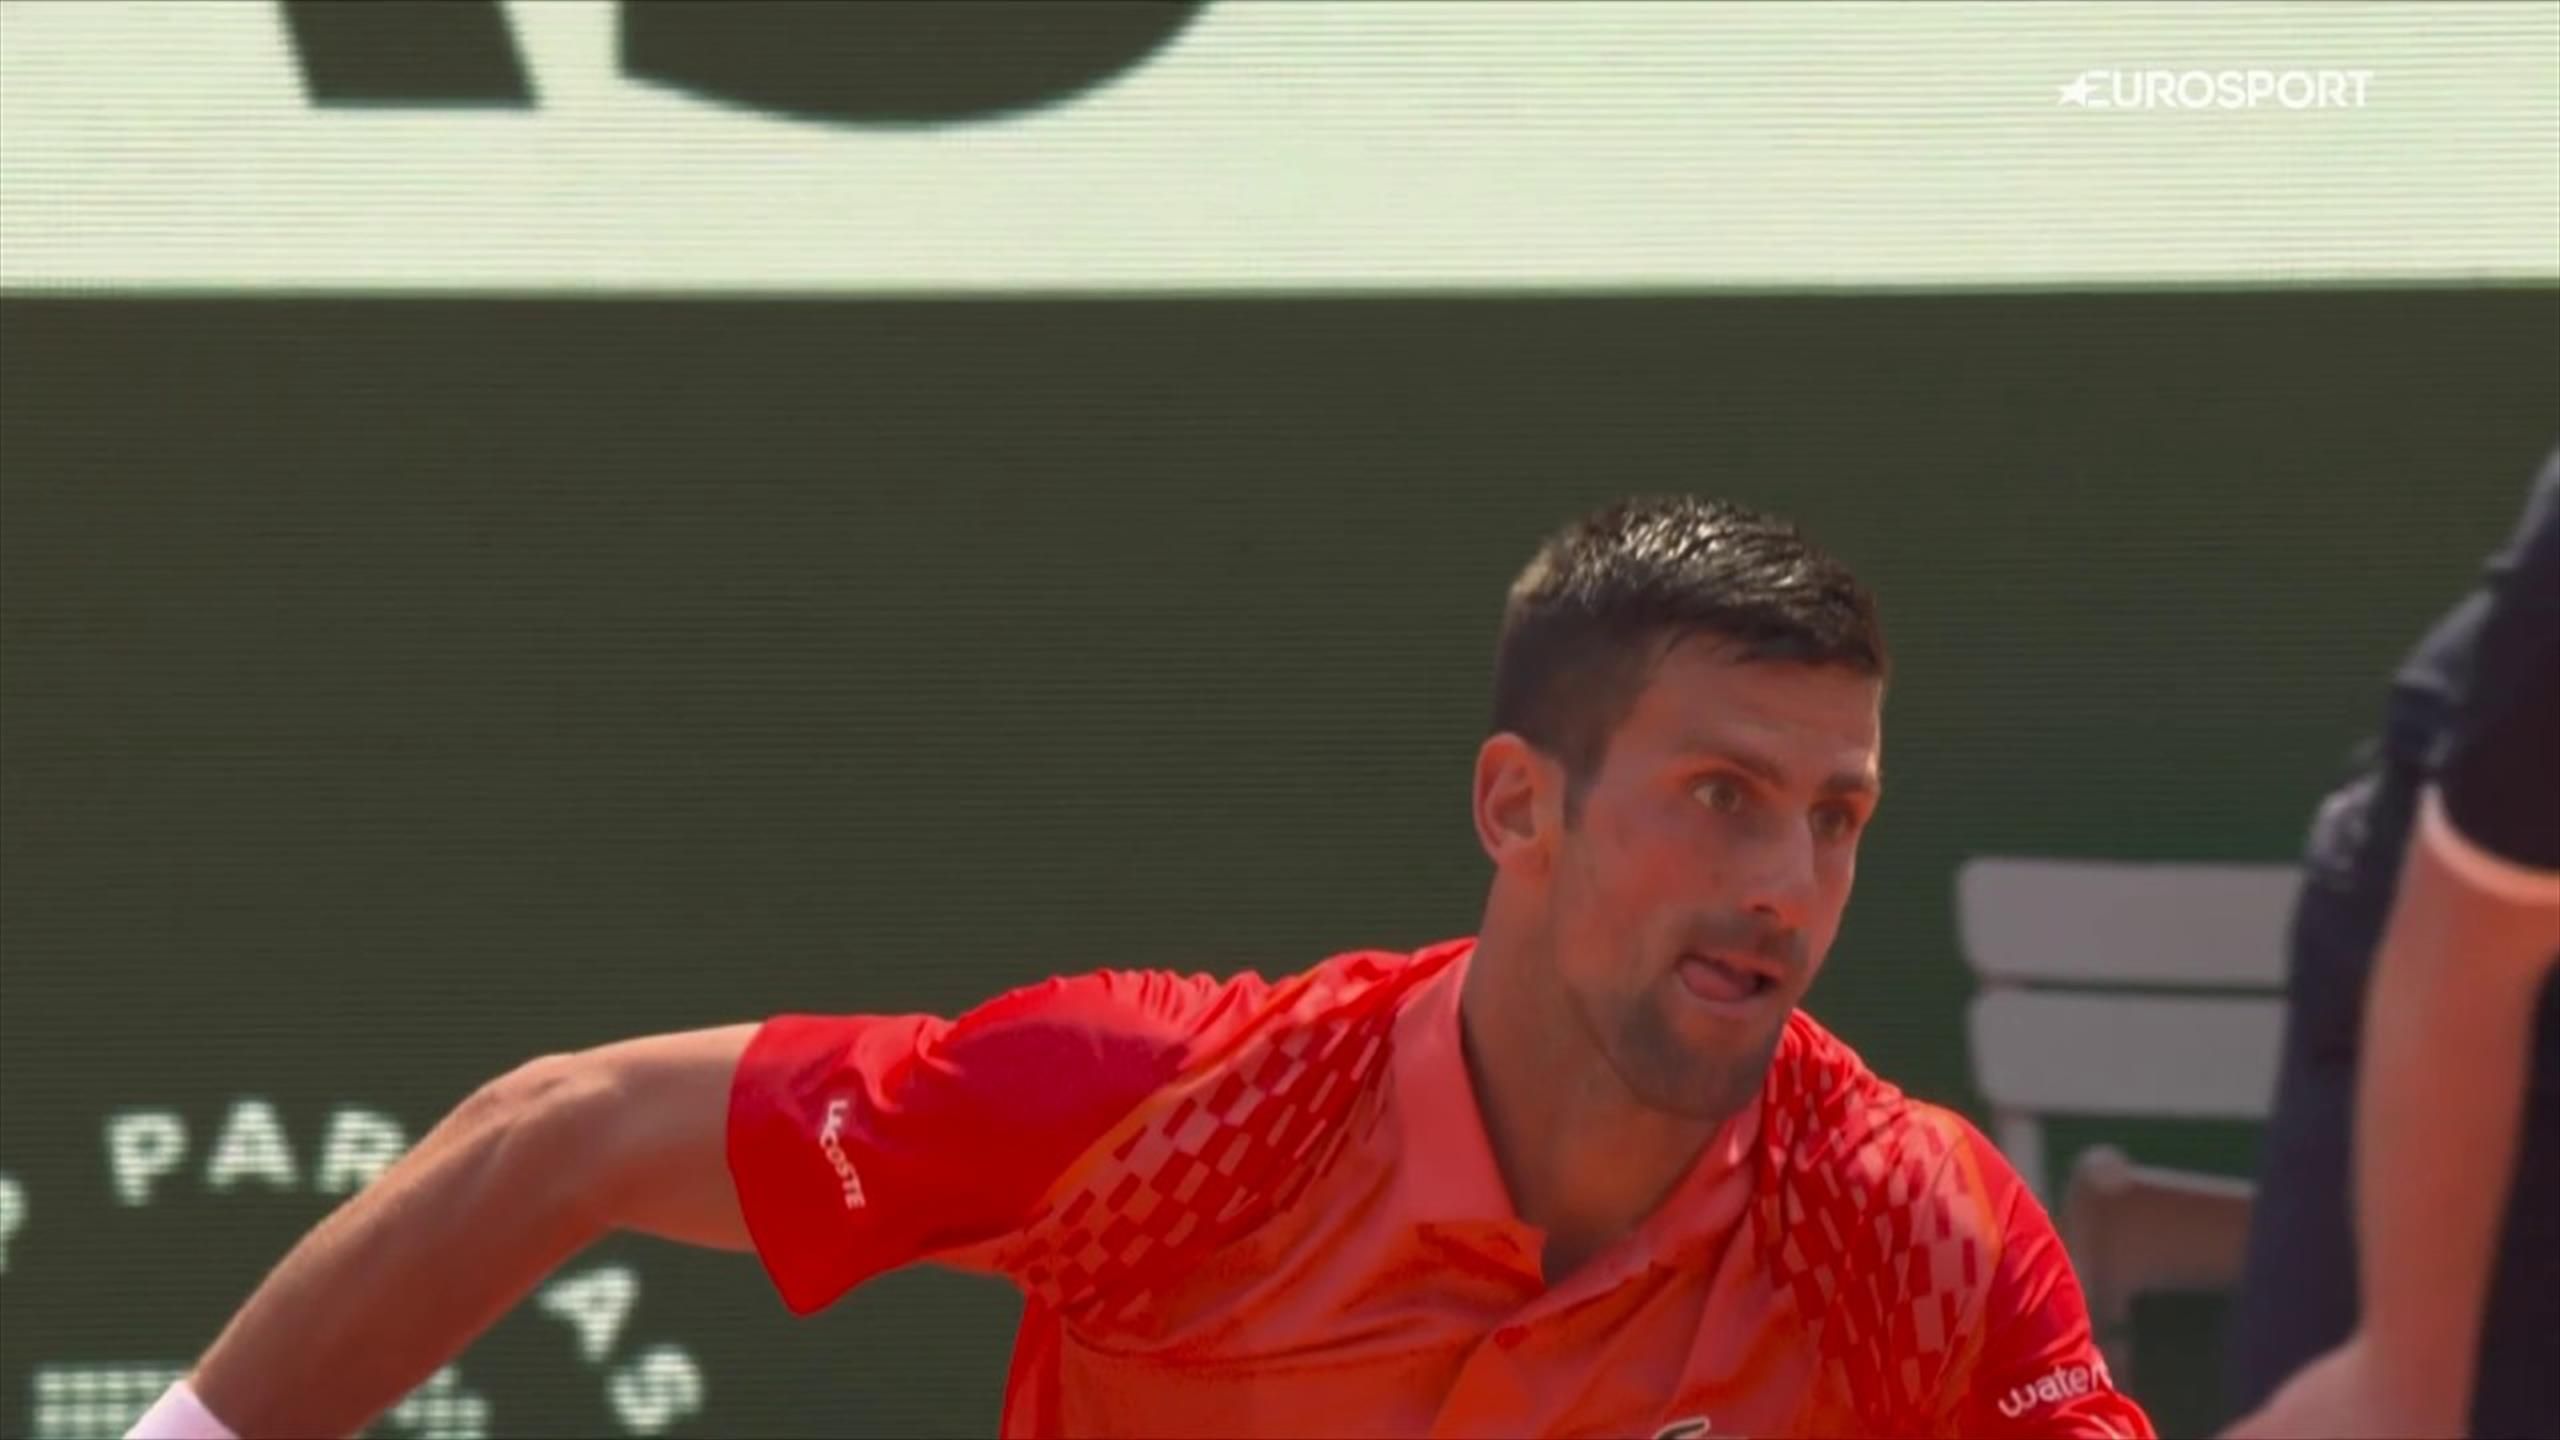 French Open Novak Djokovic level at 36 years old staggers Mats Wilander and John McEnroe - Tennis video